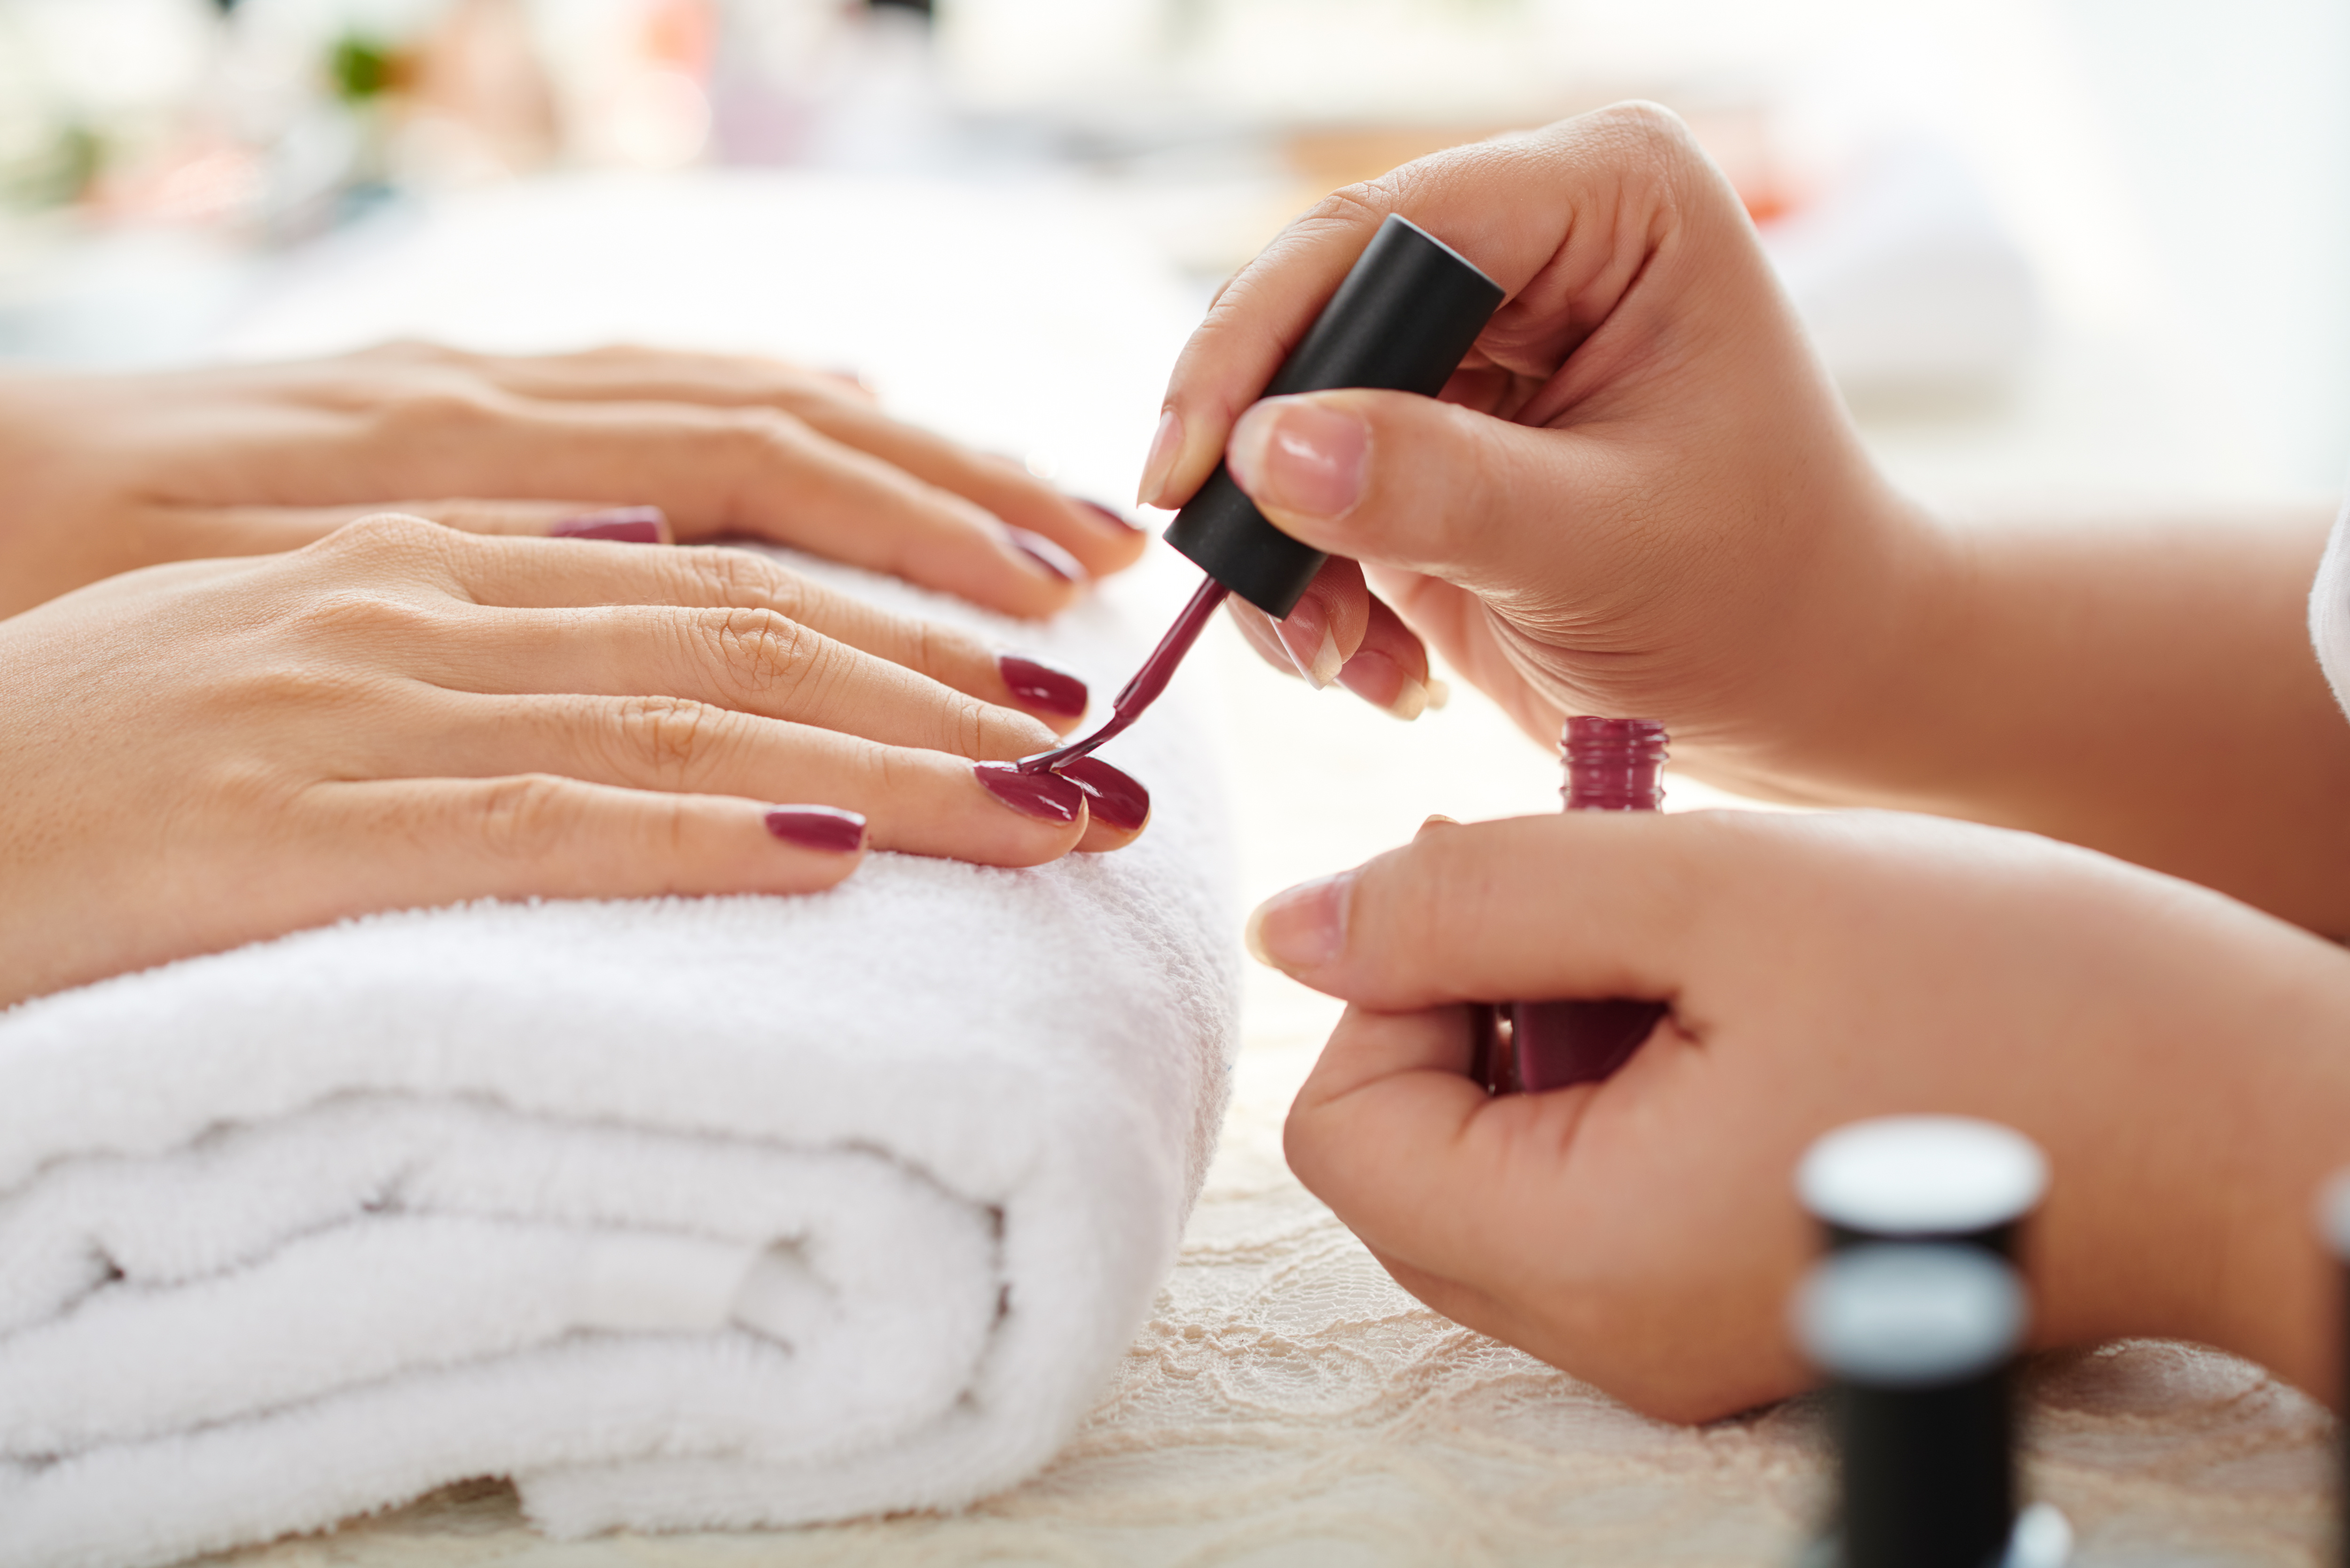 Gel Manicure + Return Soak-Off + Classic / Gel Pedicure for 1 Person (2 Sessions) at Maco Nail Spa - Get Deals, Cashback and Rewards with ShopBack GO